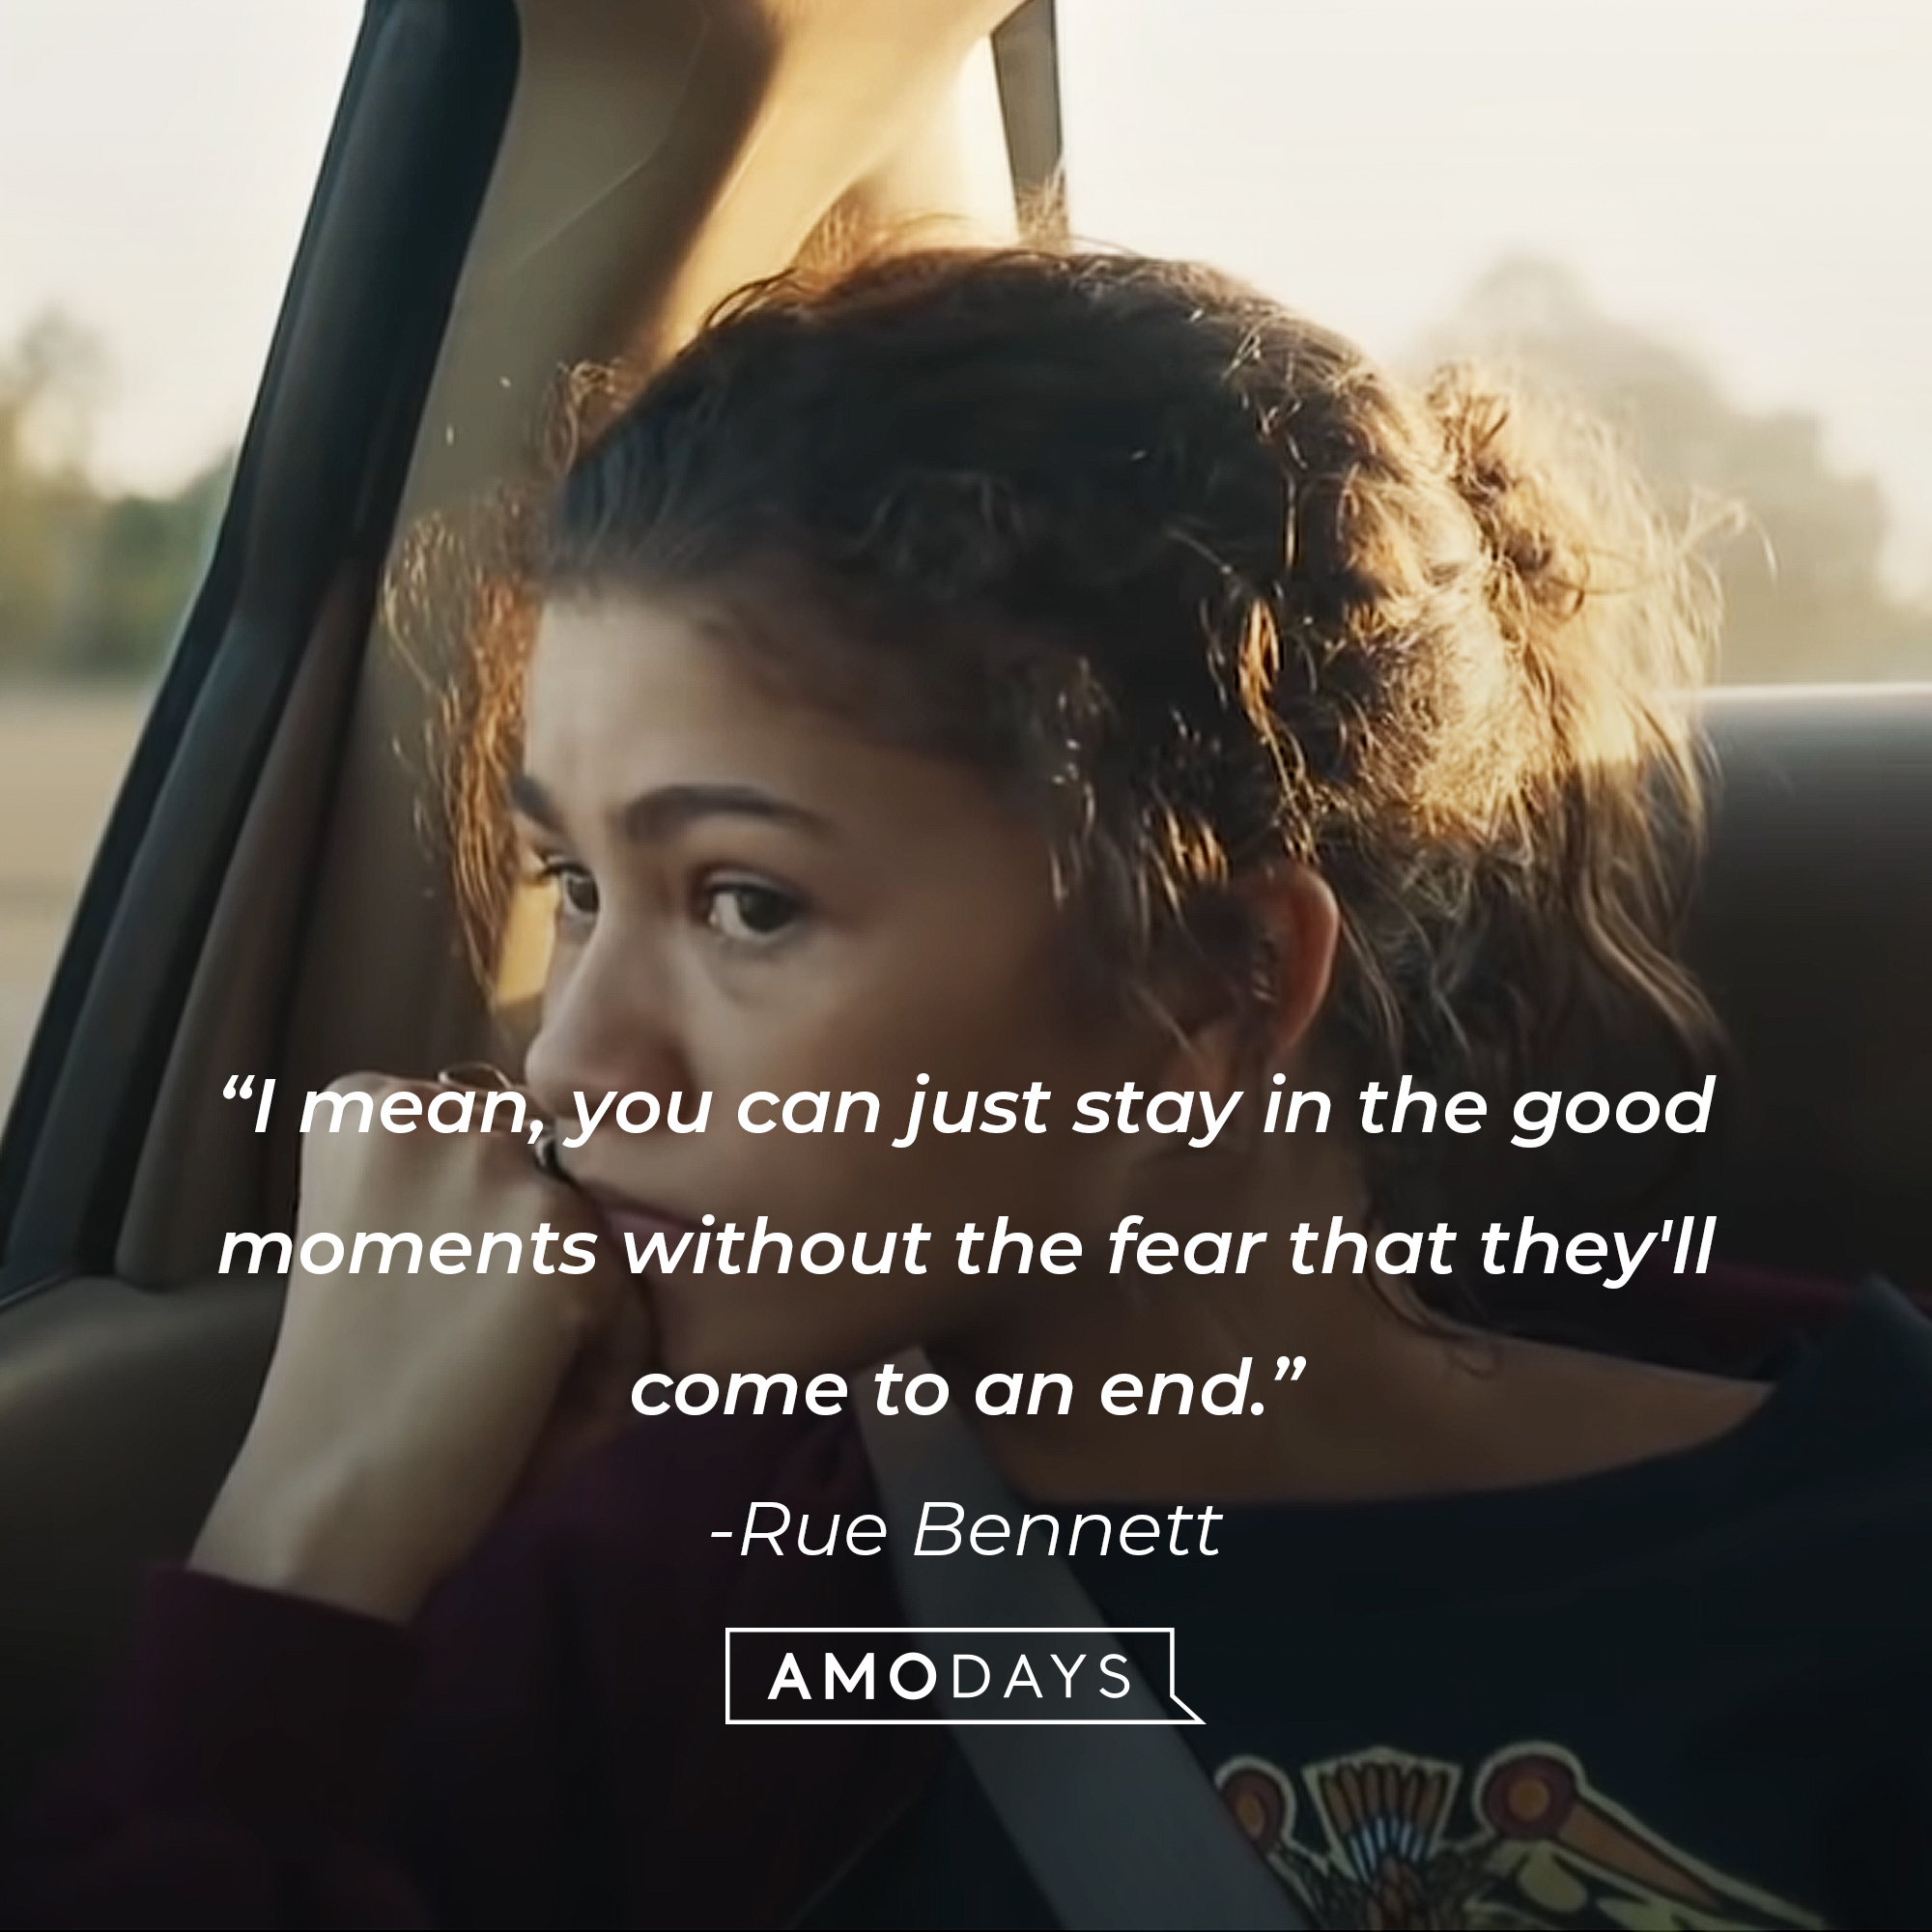 An image of Rue Bennett,  with her quote: “I mean, you can just stay in the good moments without the fear that they'll come to an end.” | Source: HBO